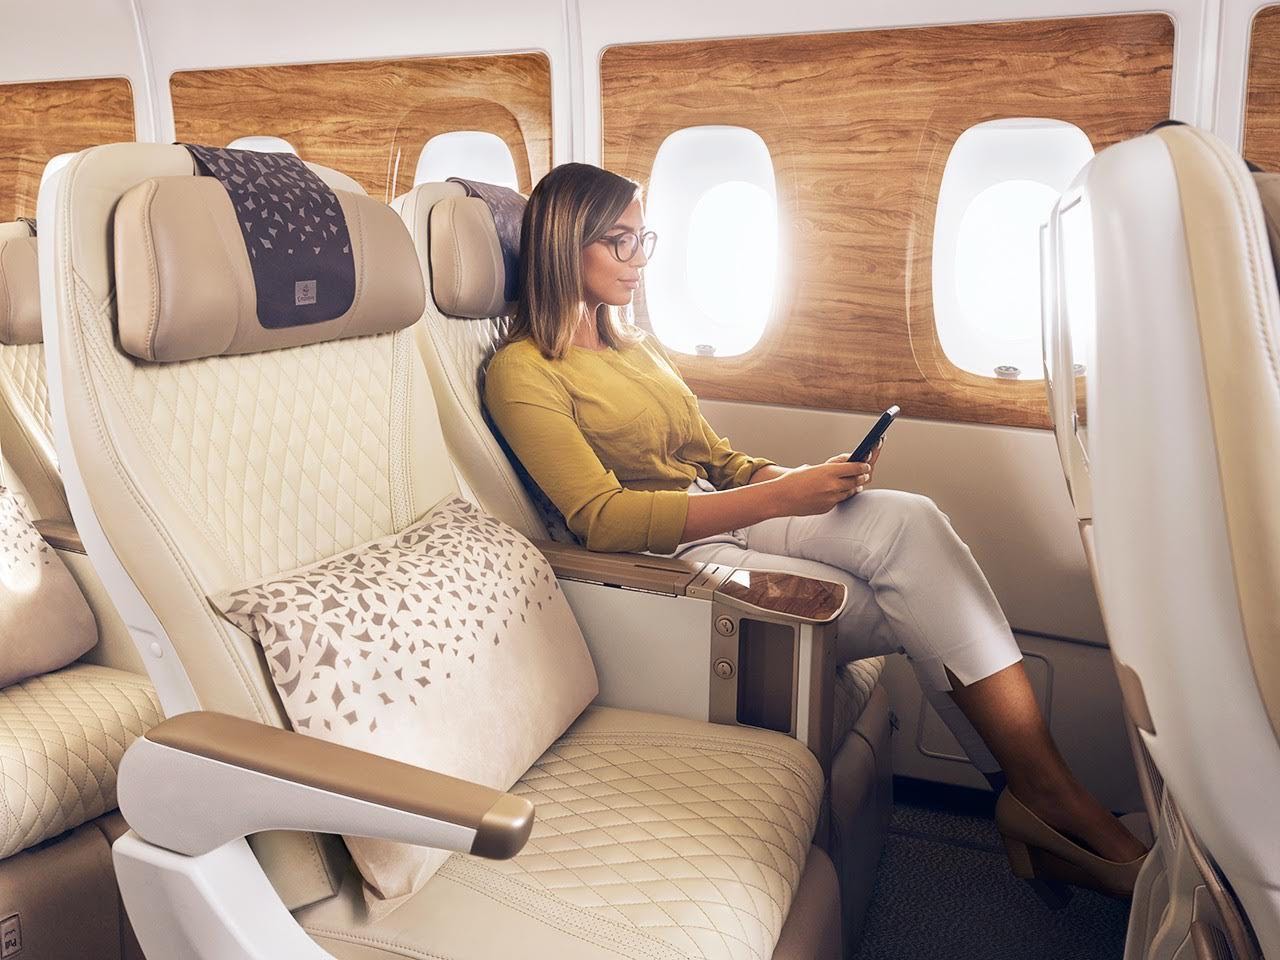 Emirates enhances its inflight connectivity, allowing all passengers in every class of travel to enjoy elements of free connectivity once they sign up for Emirates Skywards.